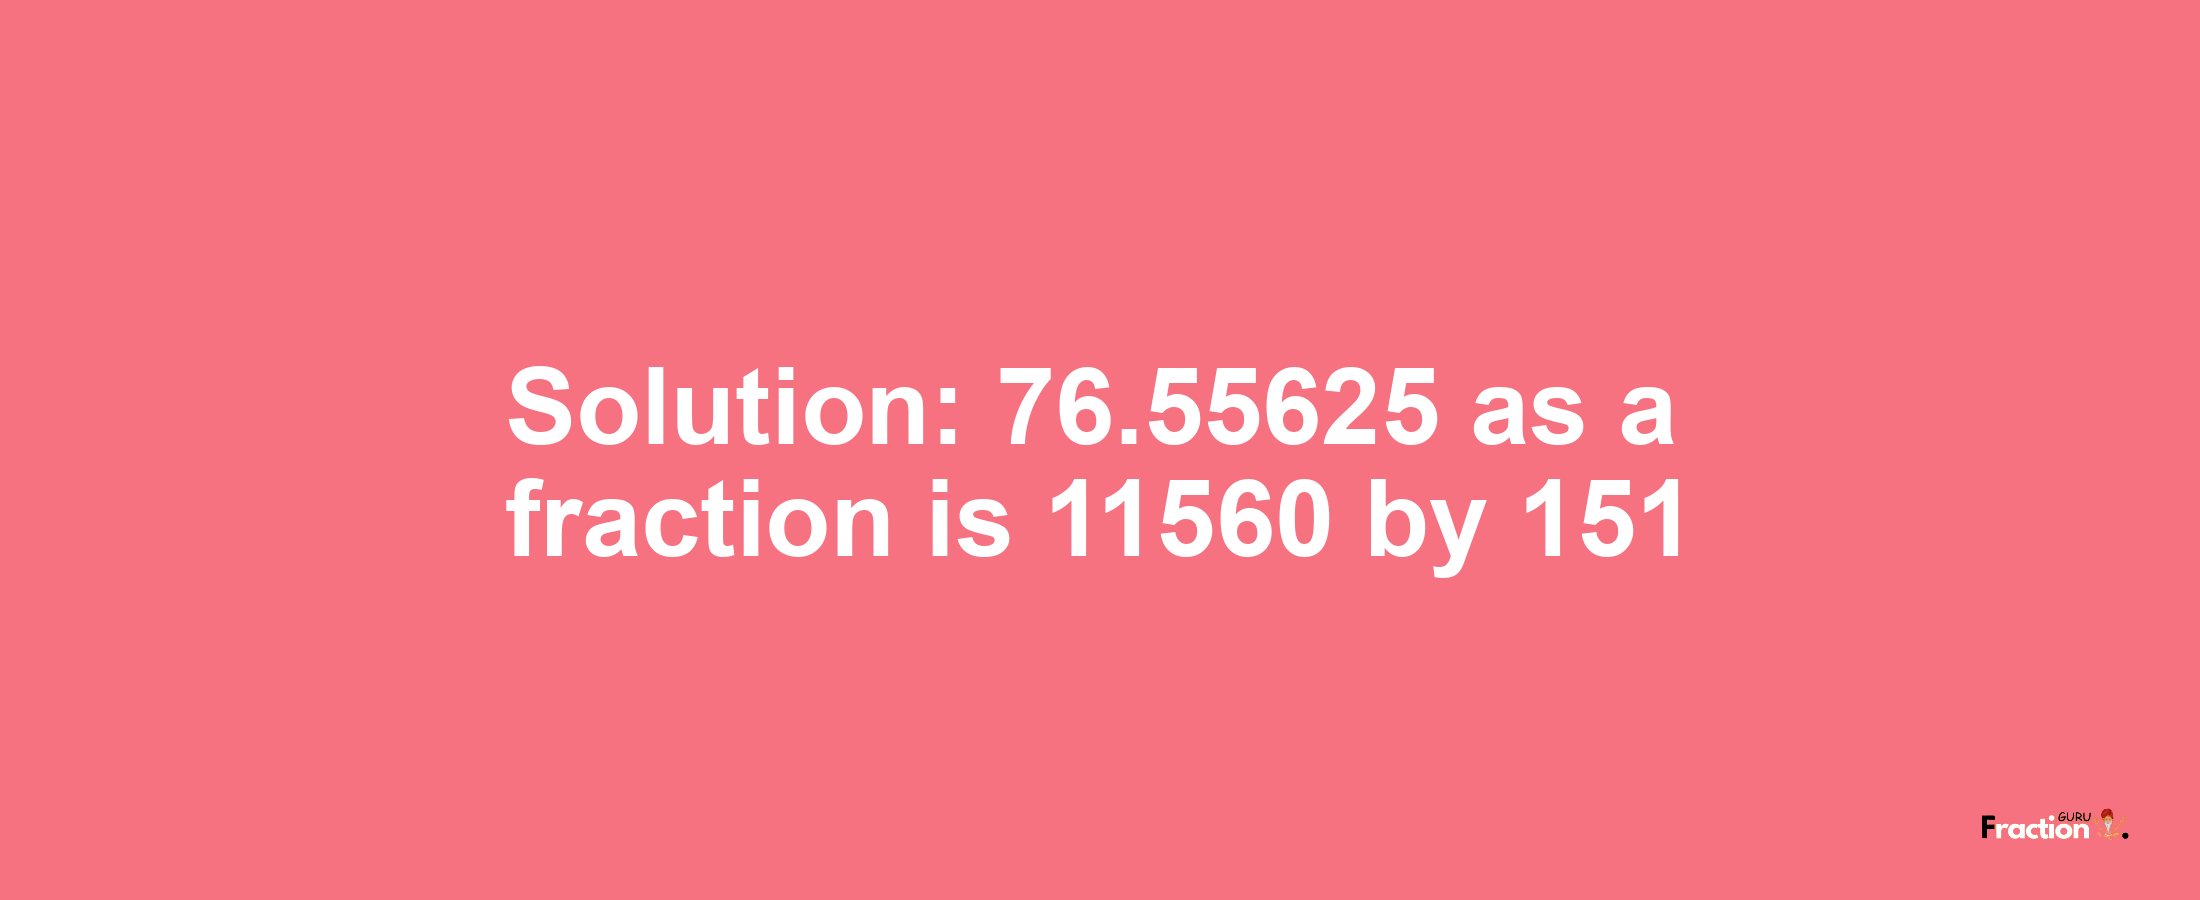 Solution:76.55625 as a fraction is 11560/151